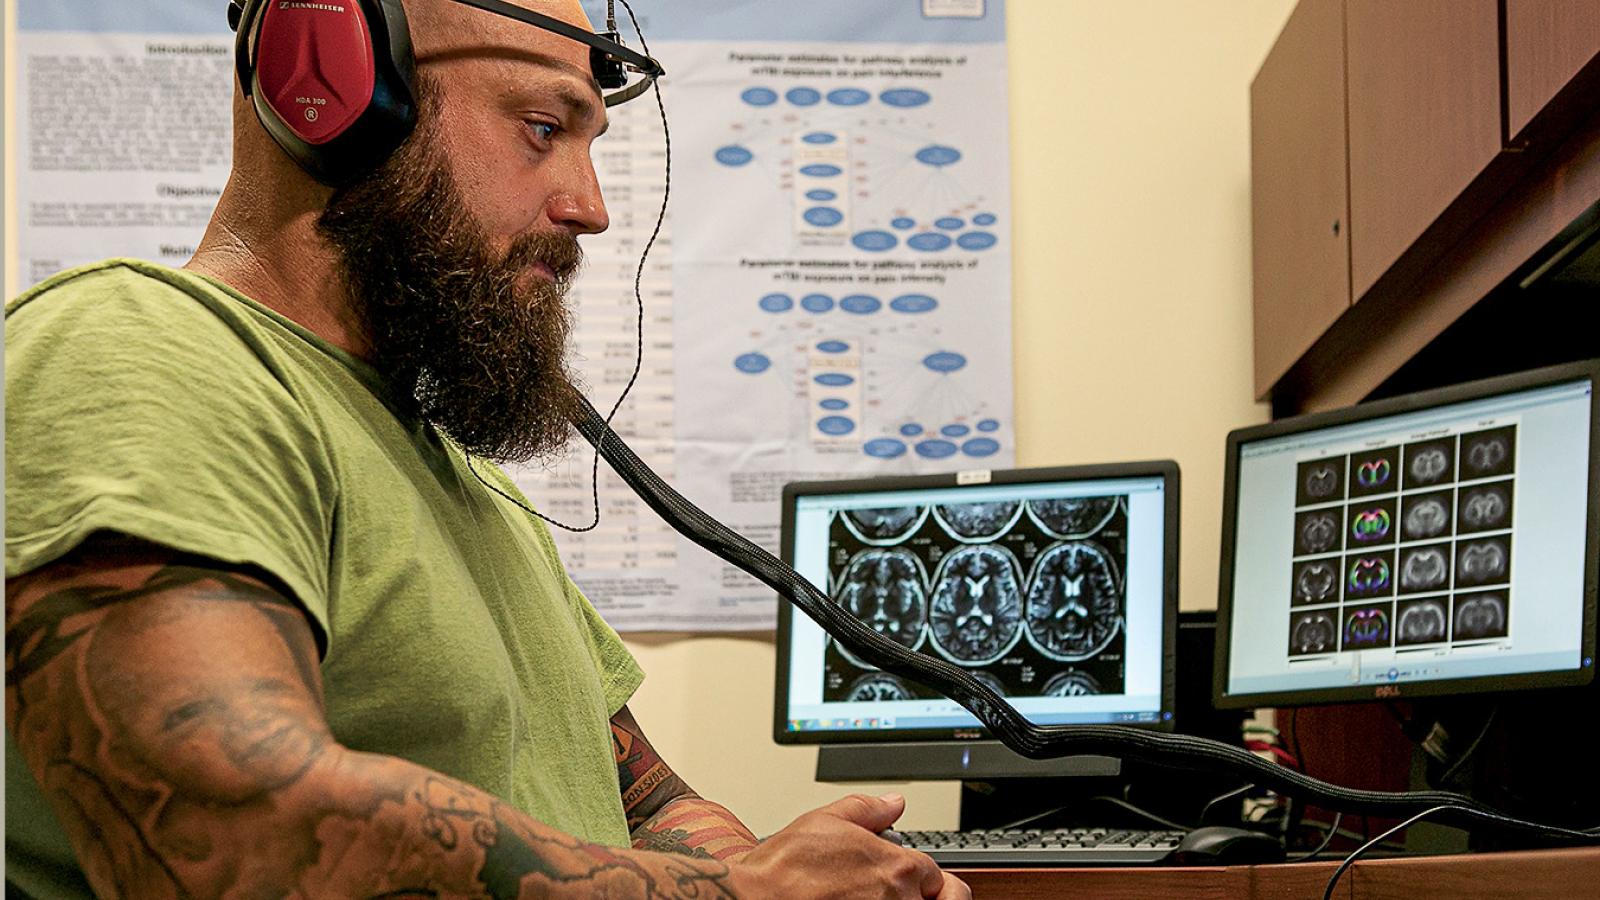 Joe Montanari, a U.S. Army veteran who suffered a traumatic brain injury while serving in Iraq, not only works as a military coordinator for the CENC and LIMBIC research grants but is also engaged as a study participant. Photo: Julia Rendleman, VCU University Marketing